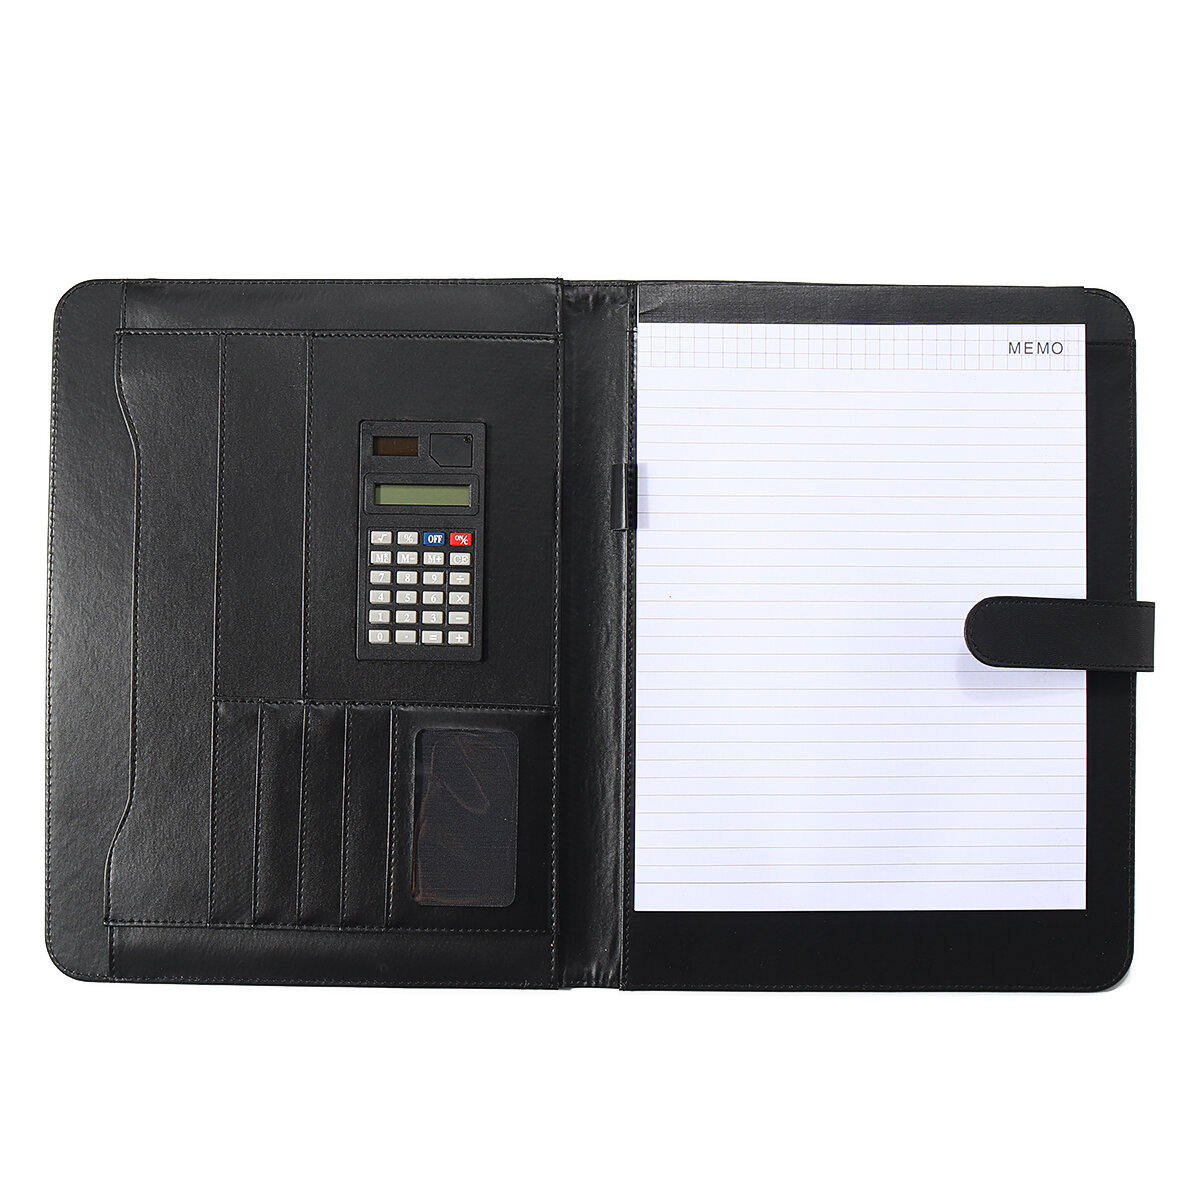 A4 Conference File Folder Soft Leather Portfolio Organiser with Calculator Travel Journal Daily Plan Business Supplies